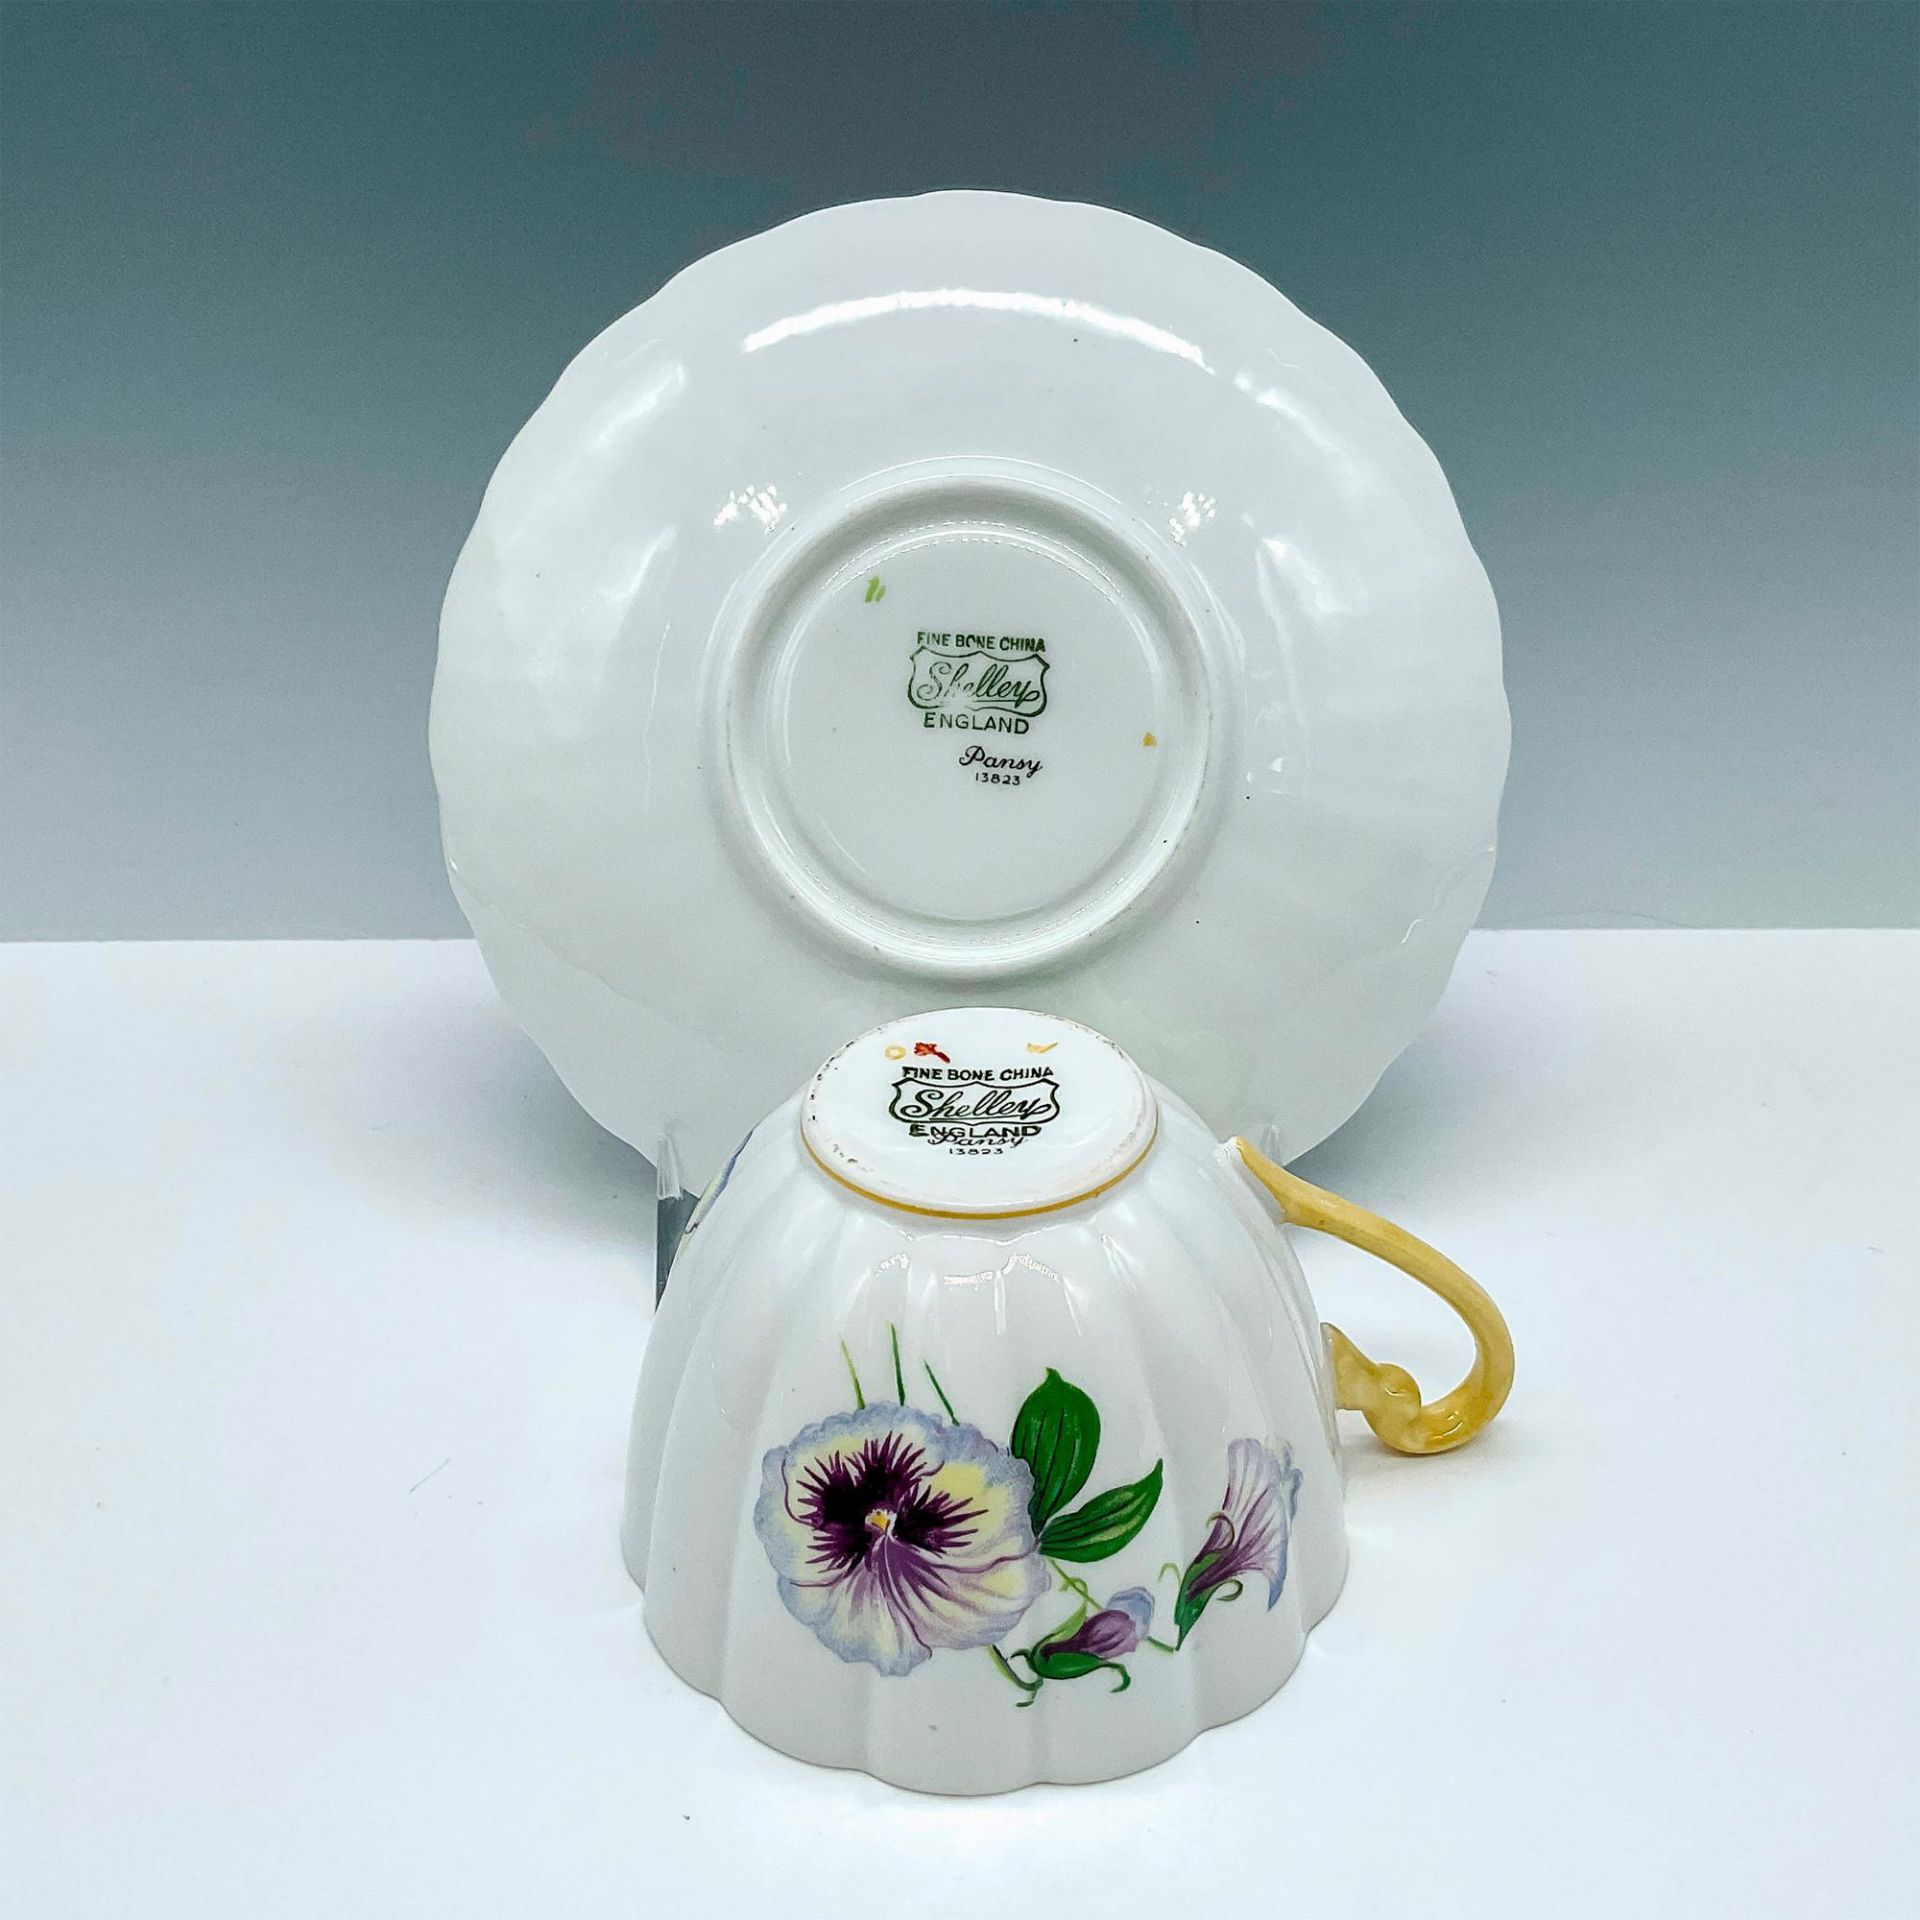 Shelley China Teacup and Saucer Set, Pansy - Image 3 of 3